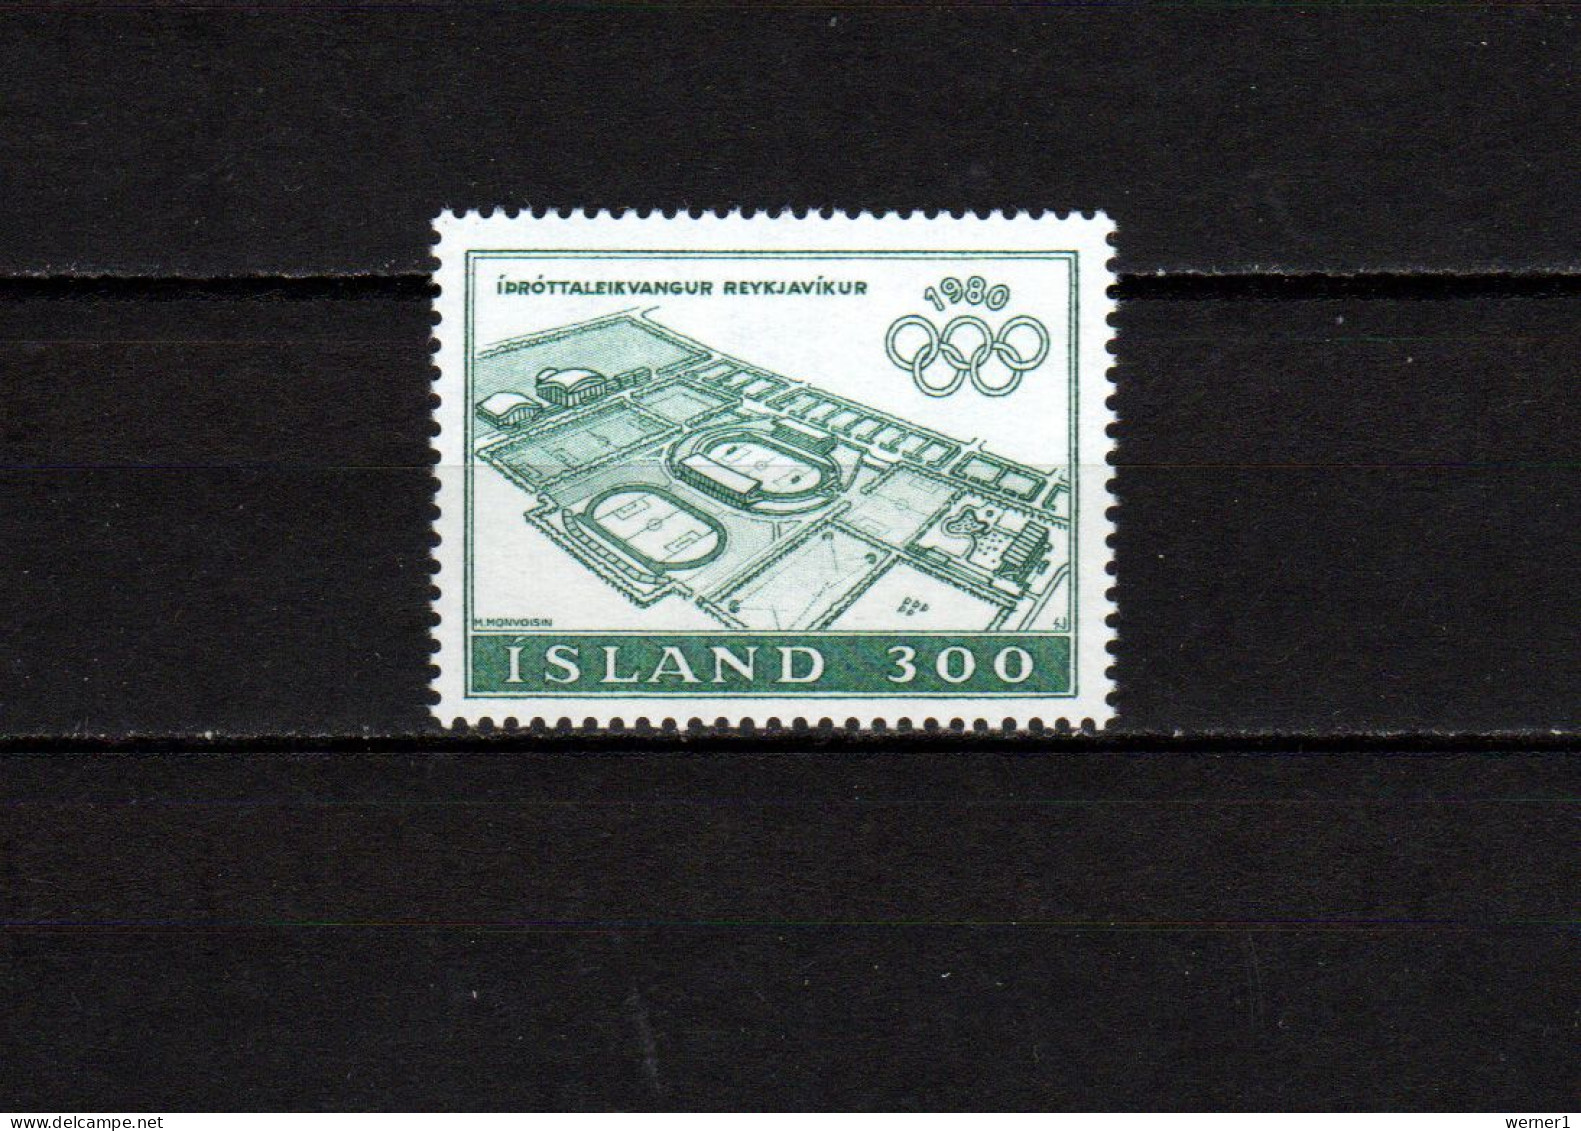 Iceland 1980 Olympic Games Moscow Stamp MNH - Sommer 1980: Moskau